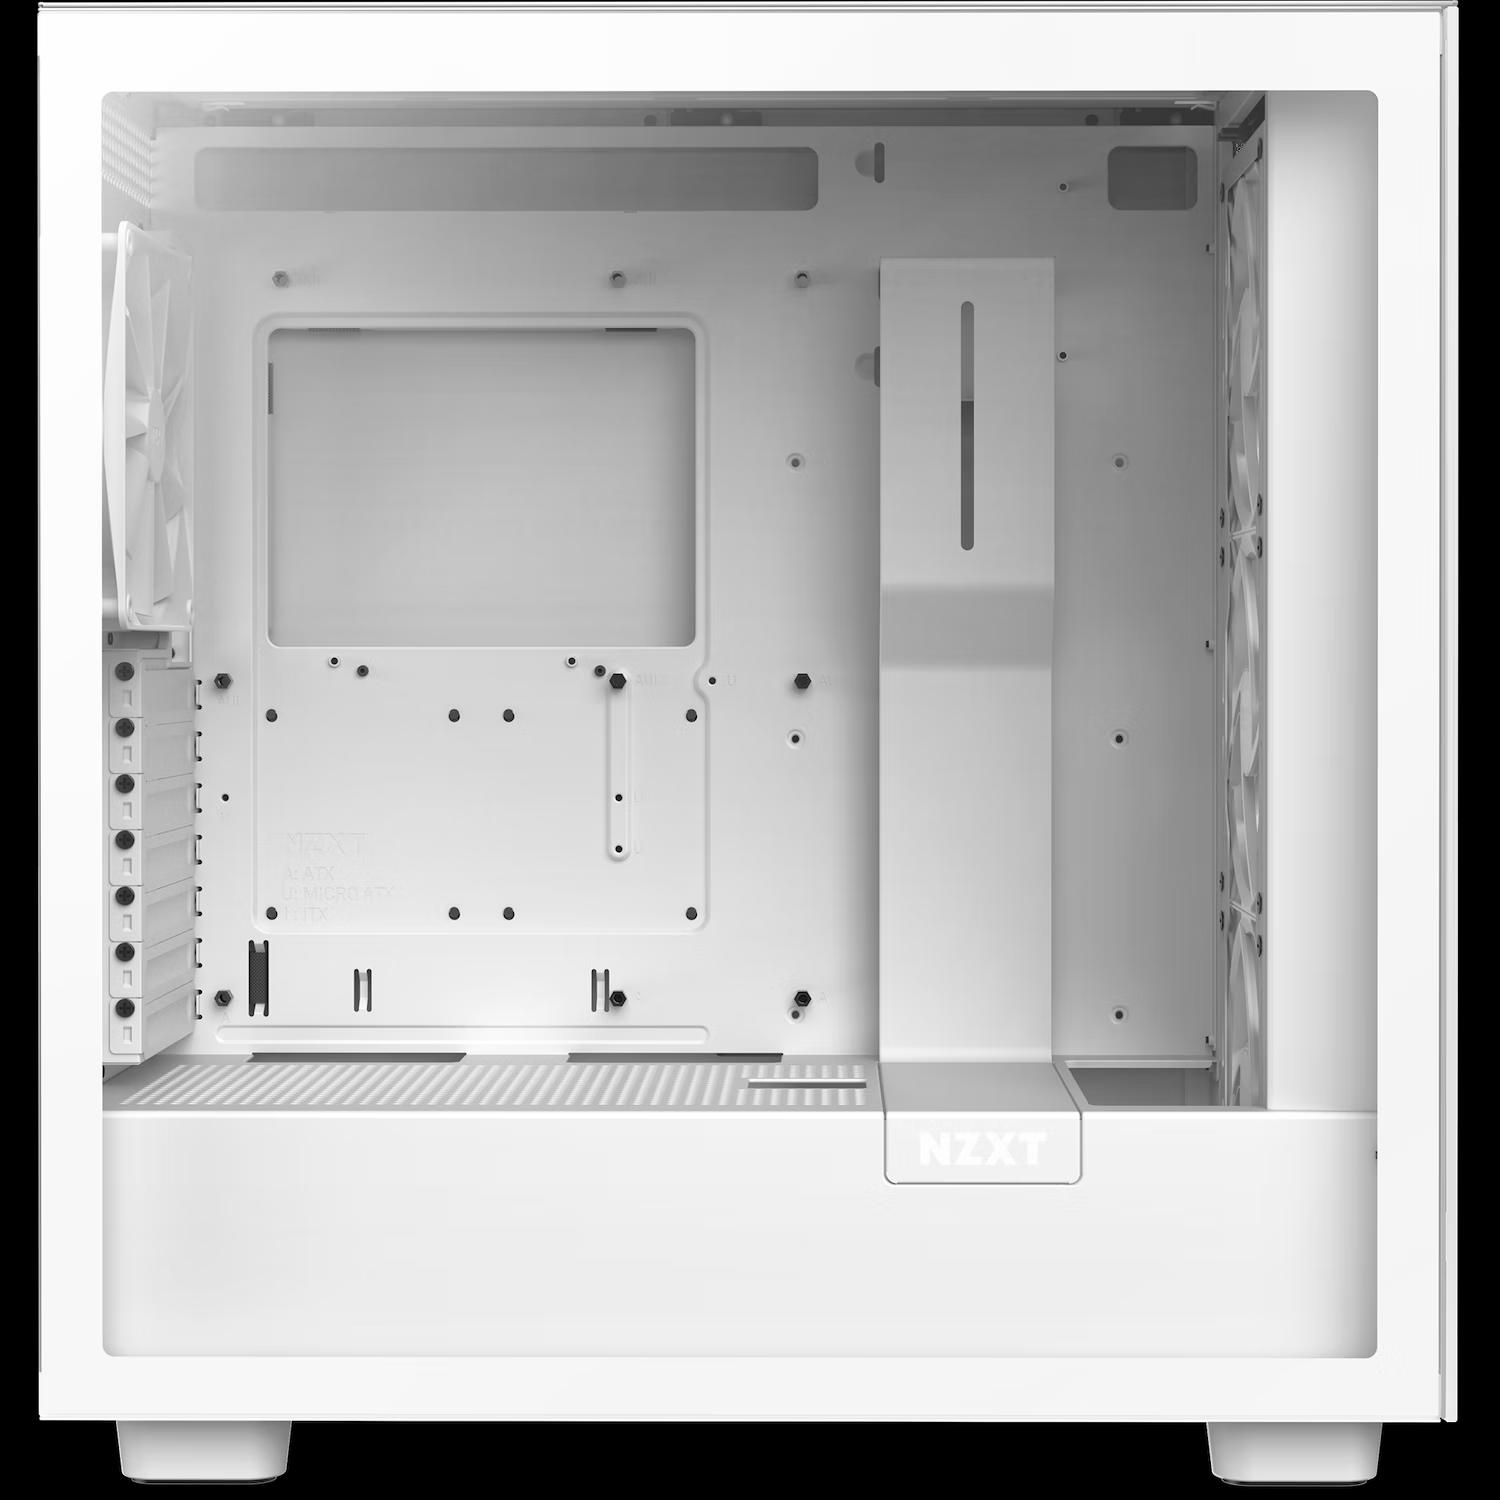 NZXT H7 ELITE EDITION ALL WHITE